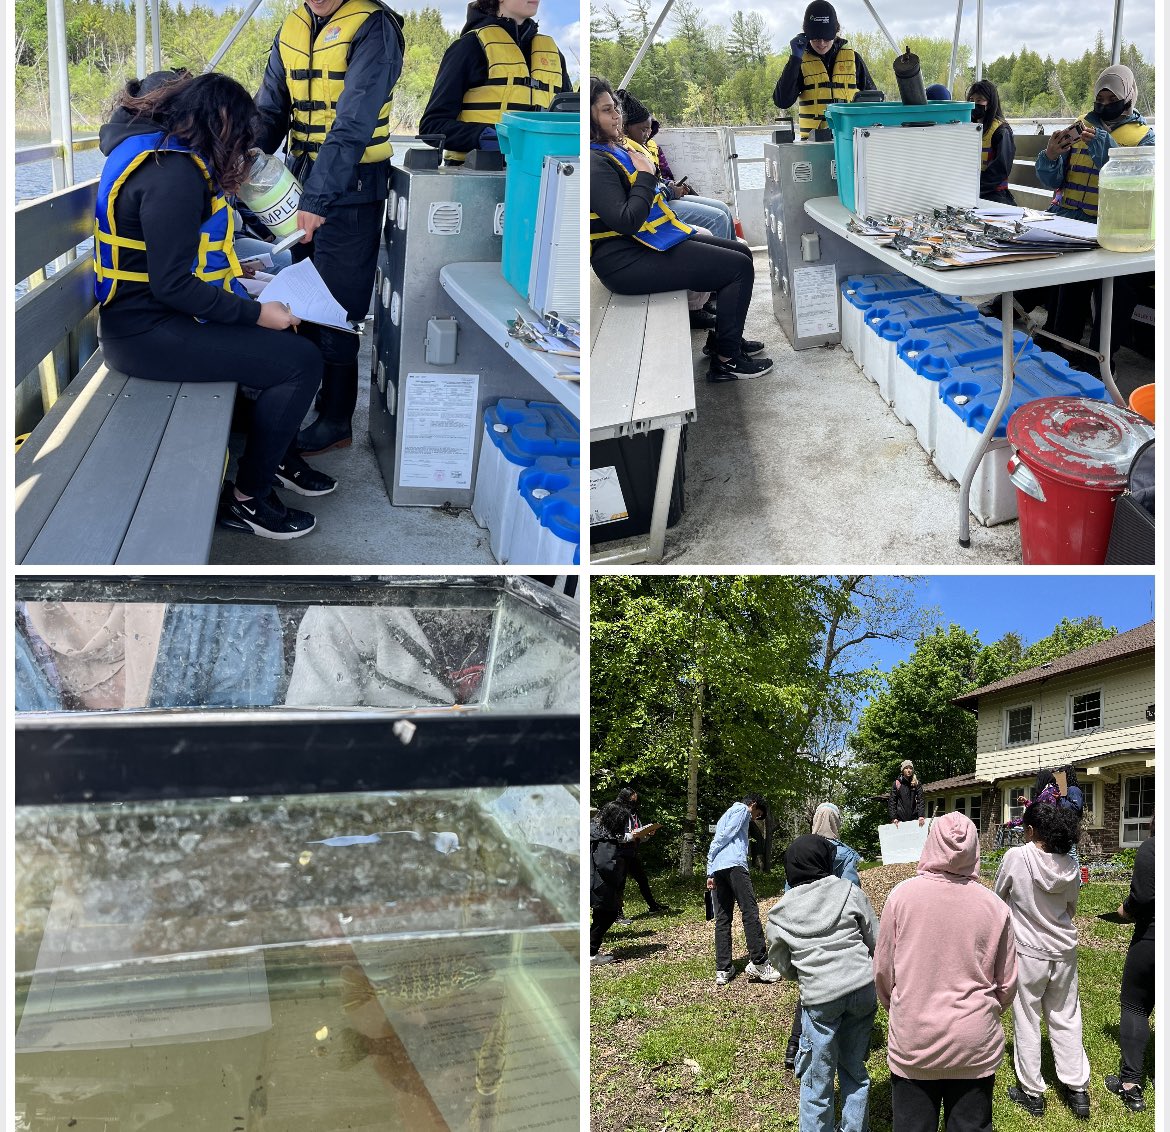 SNC1W students from Father Michael McGivney go to Lake St. George to learn about lake ecosystems- water quality, aquatic life and vegetation around the lake. 🐟 🌳@PathwaysYCDSB @YCDSB @CAD_ycdsb #experientiallearning